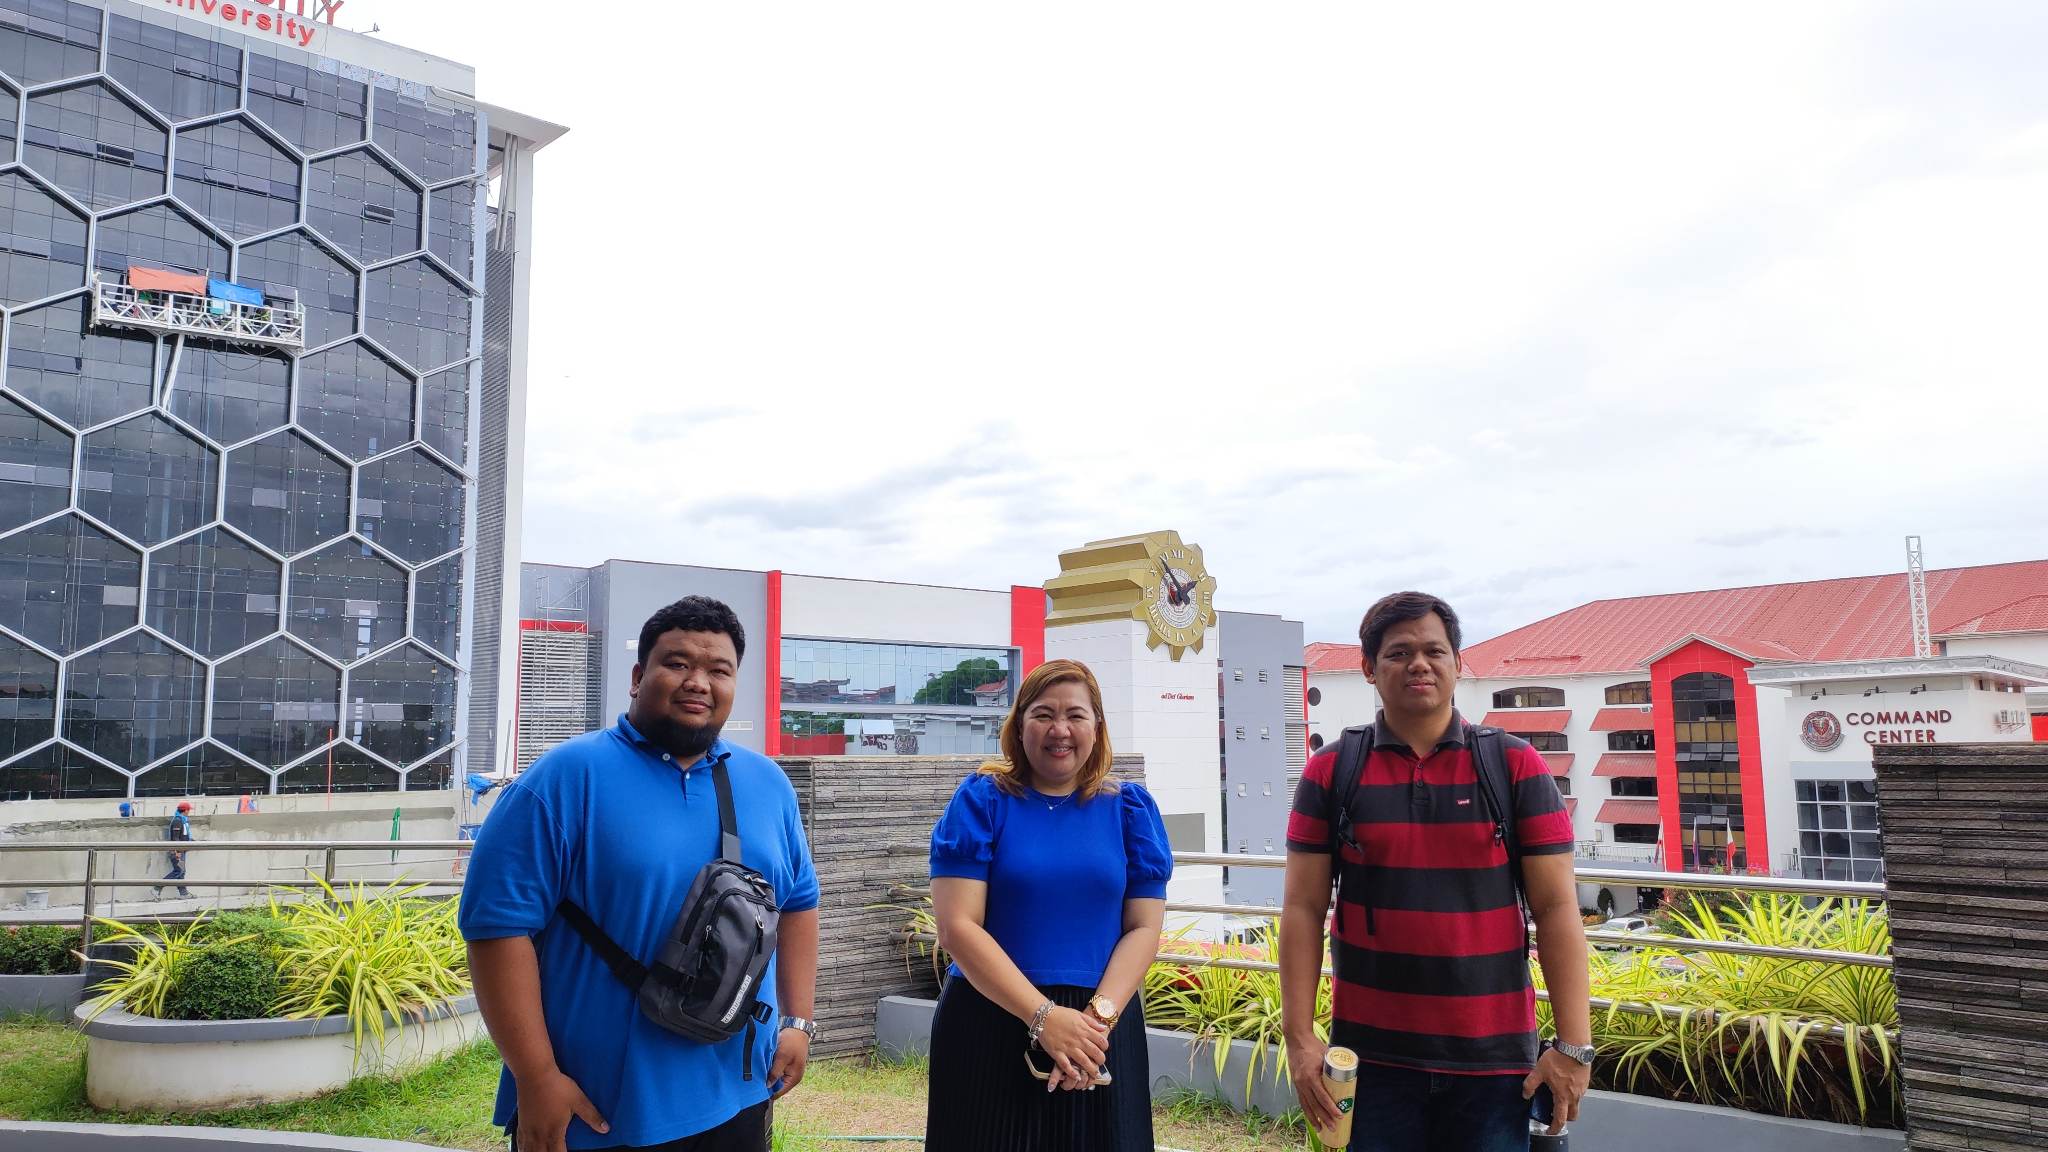 CBSUA CONDUCTS CROSS-VISIT, BENCHMARKING ACTIVITY WITH TOP HIGHER EDUCATION INSTITUTIONS IN LUZON, PHILIPPINES